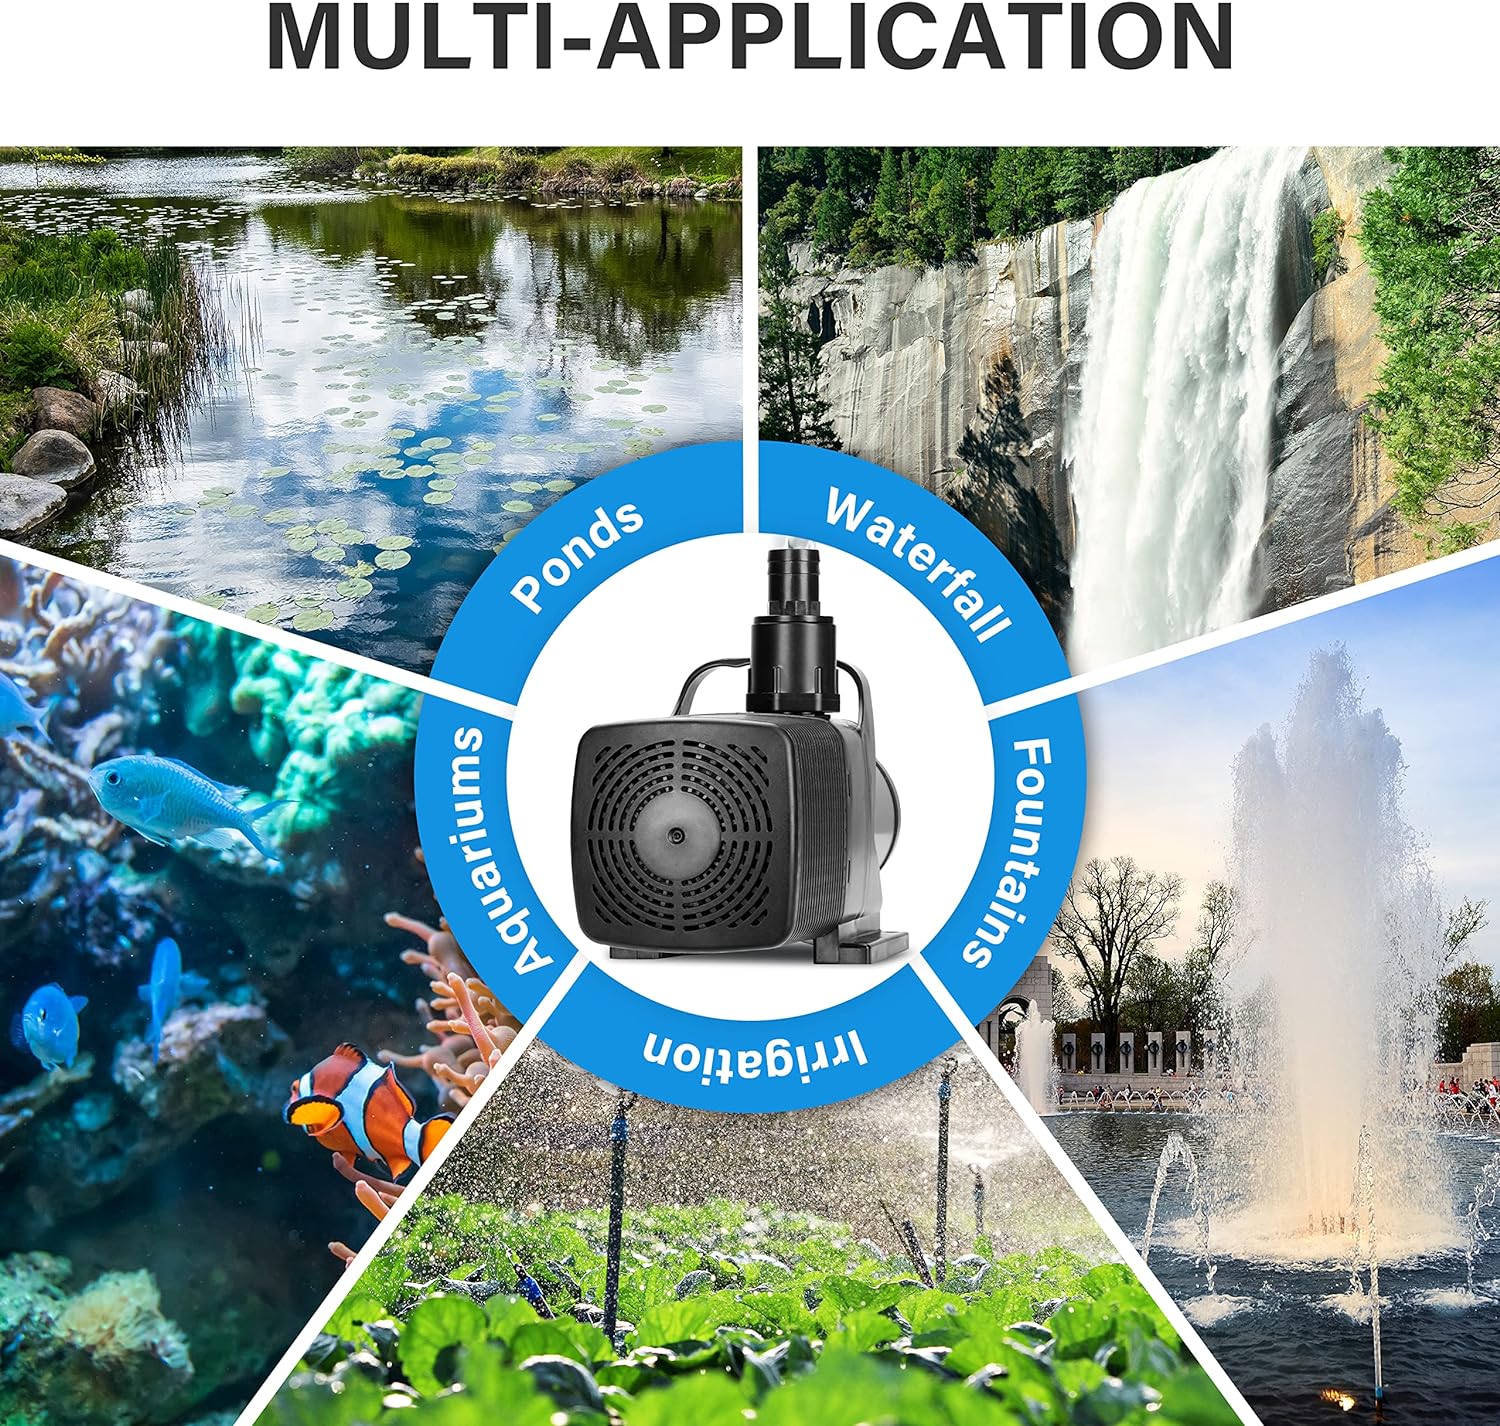 Simple Deluxe 110W 1982GPH Submersible Water Pump, Ultra Quiet Pond Pump, Aquarium Pump with 14FT Lift Height for Koi Pond, Pool Waterfall, Fountains, Fish Tank, Statuary, Hydroponic